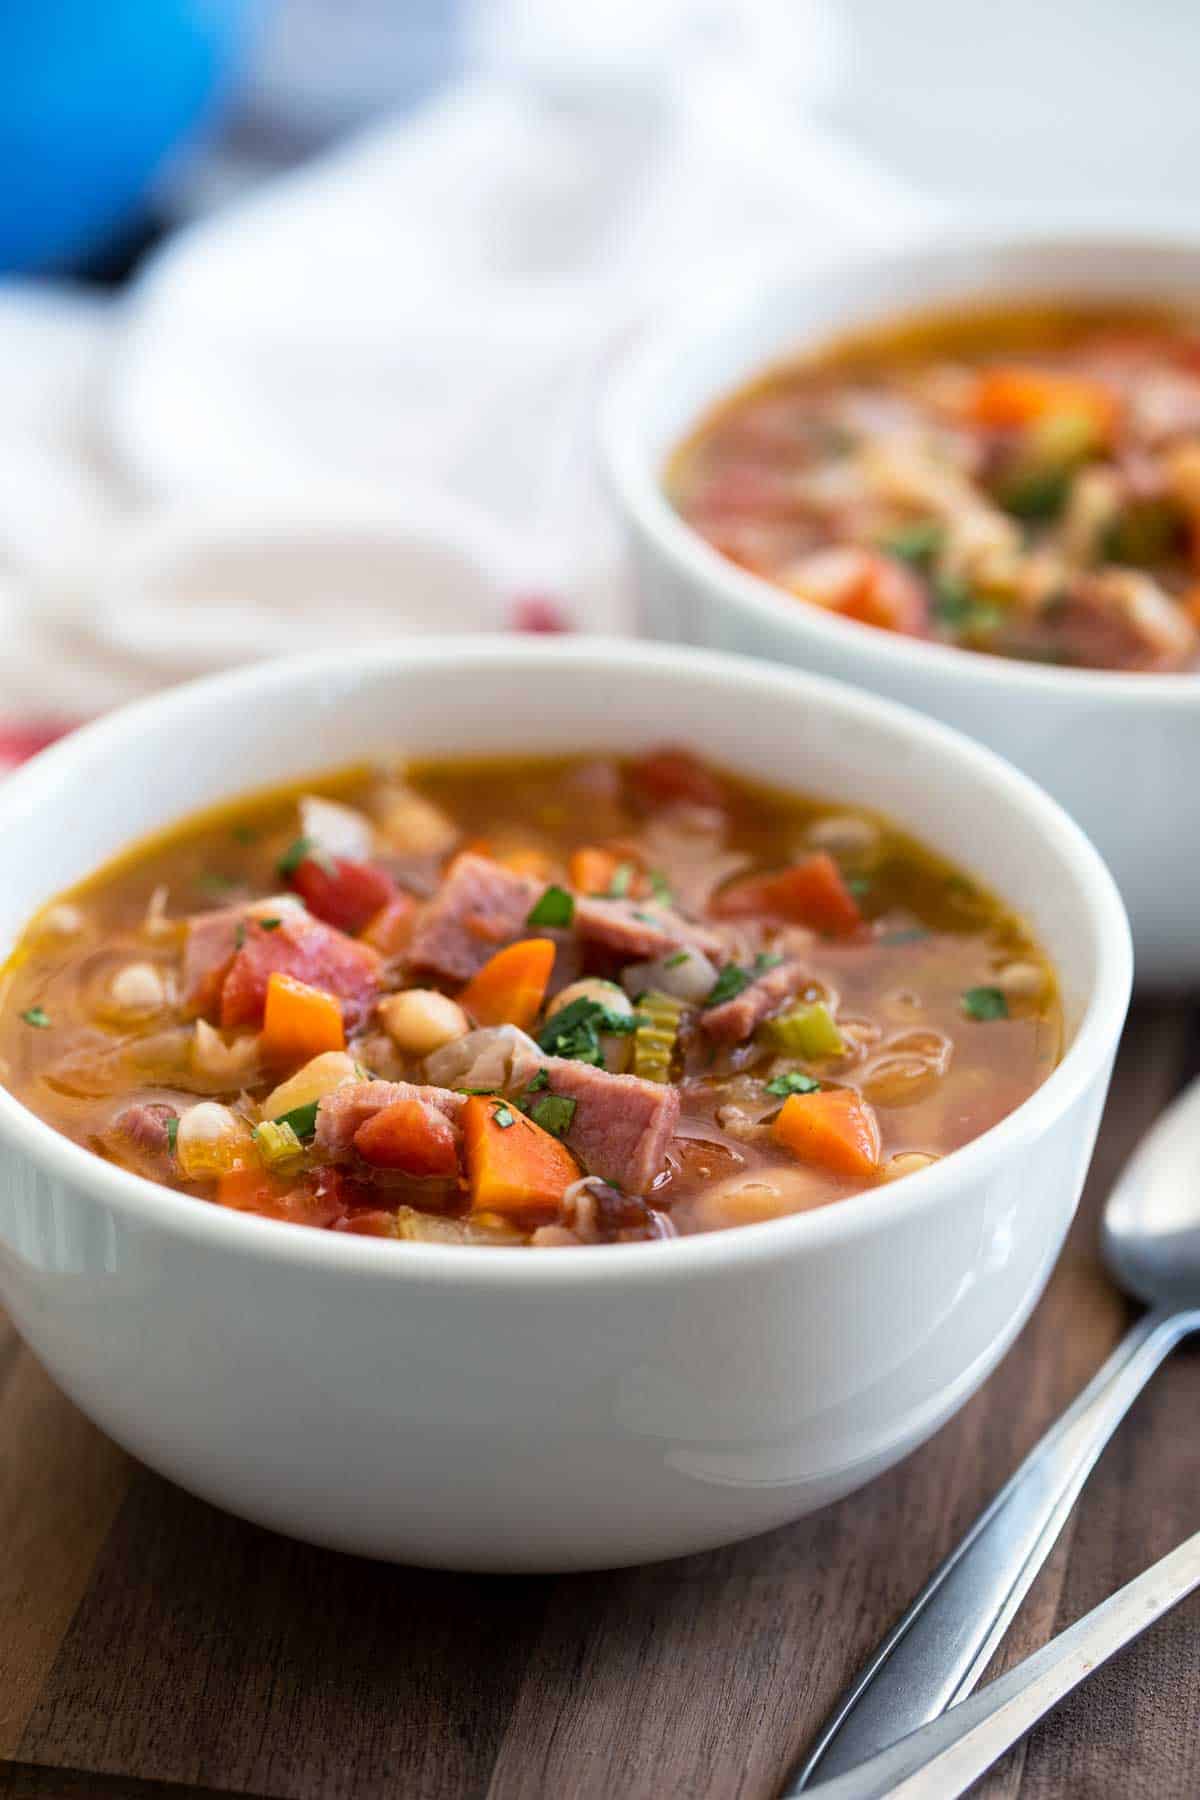 How to Make Ham and Bean Soup